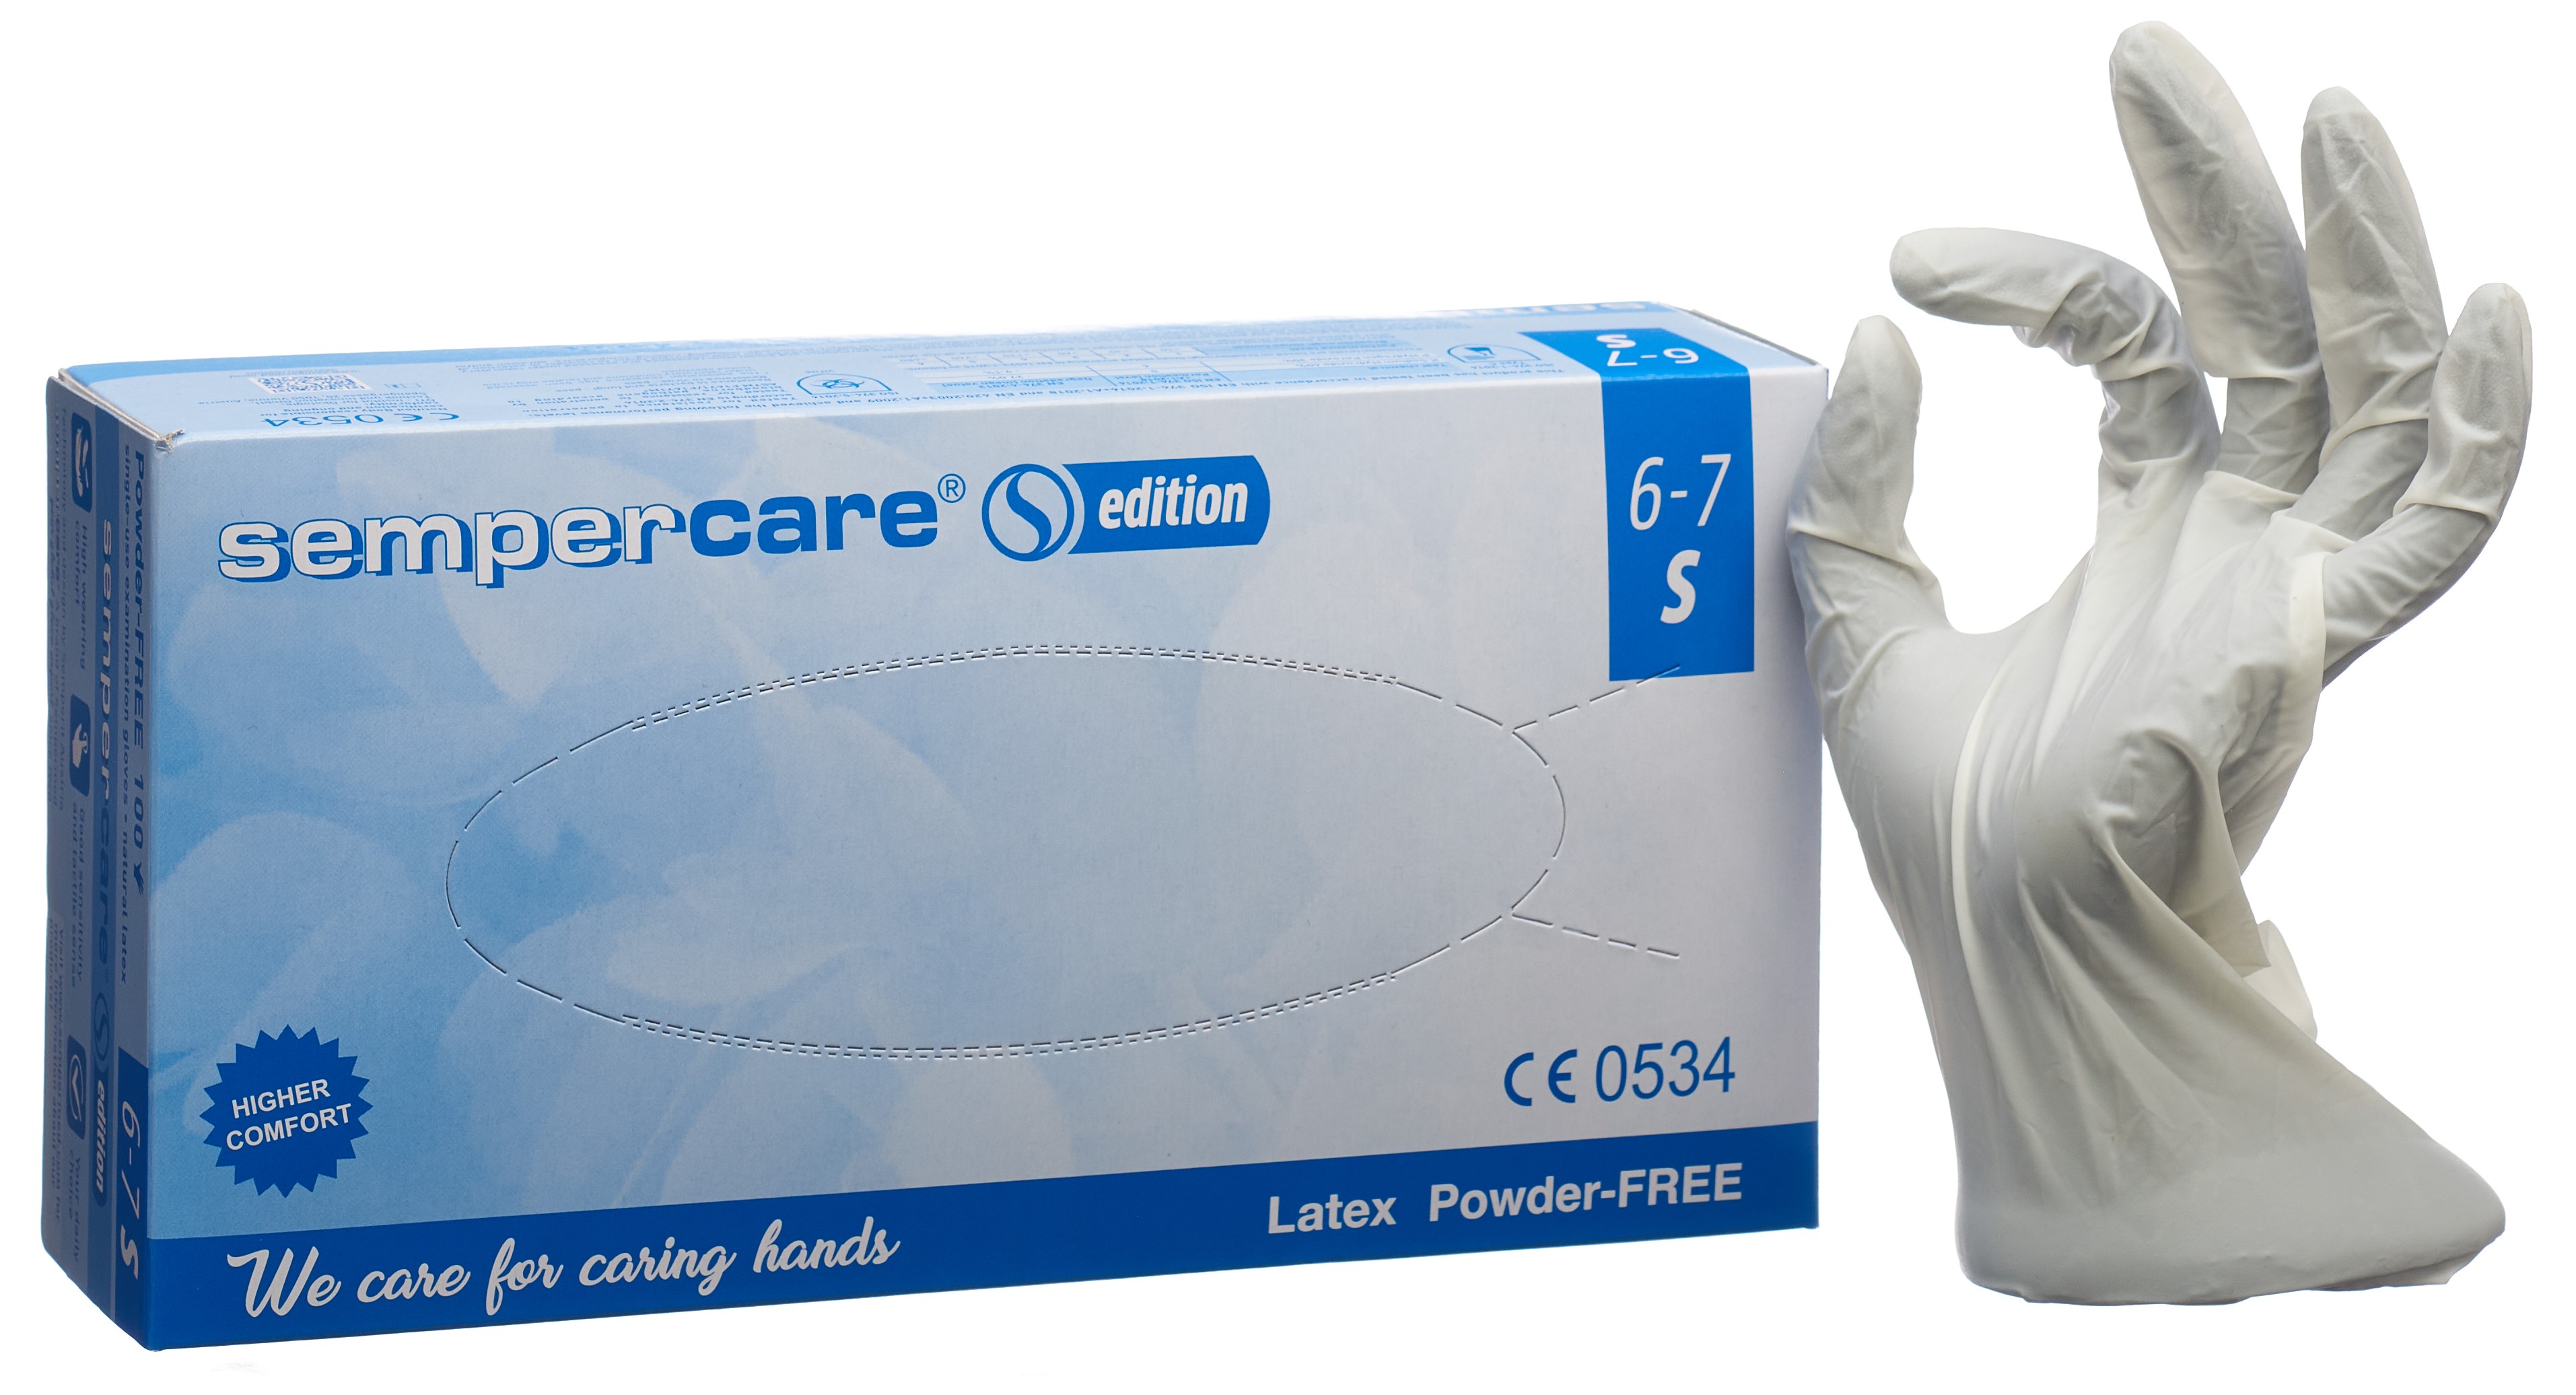 SEMPERCARE Edition Handschuhe Latex S ung 100 Stk